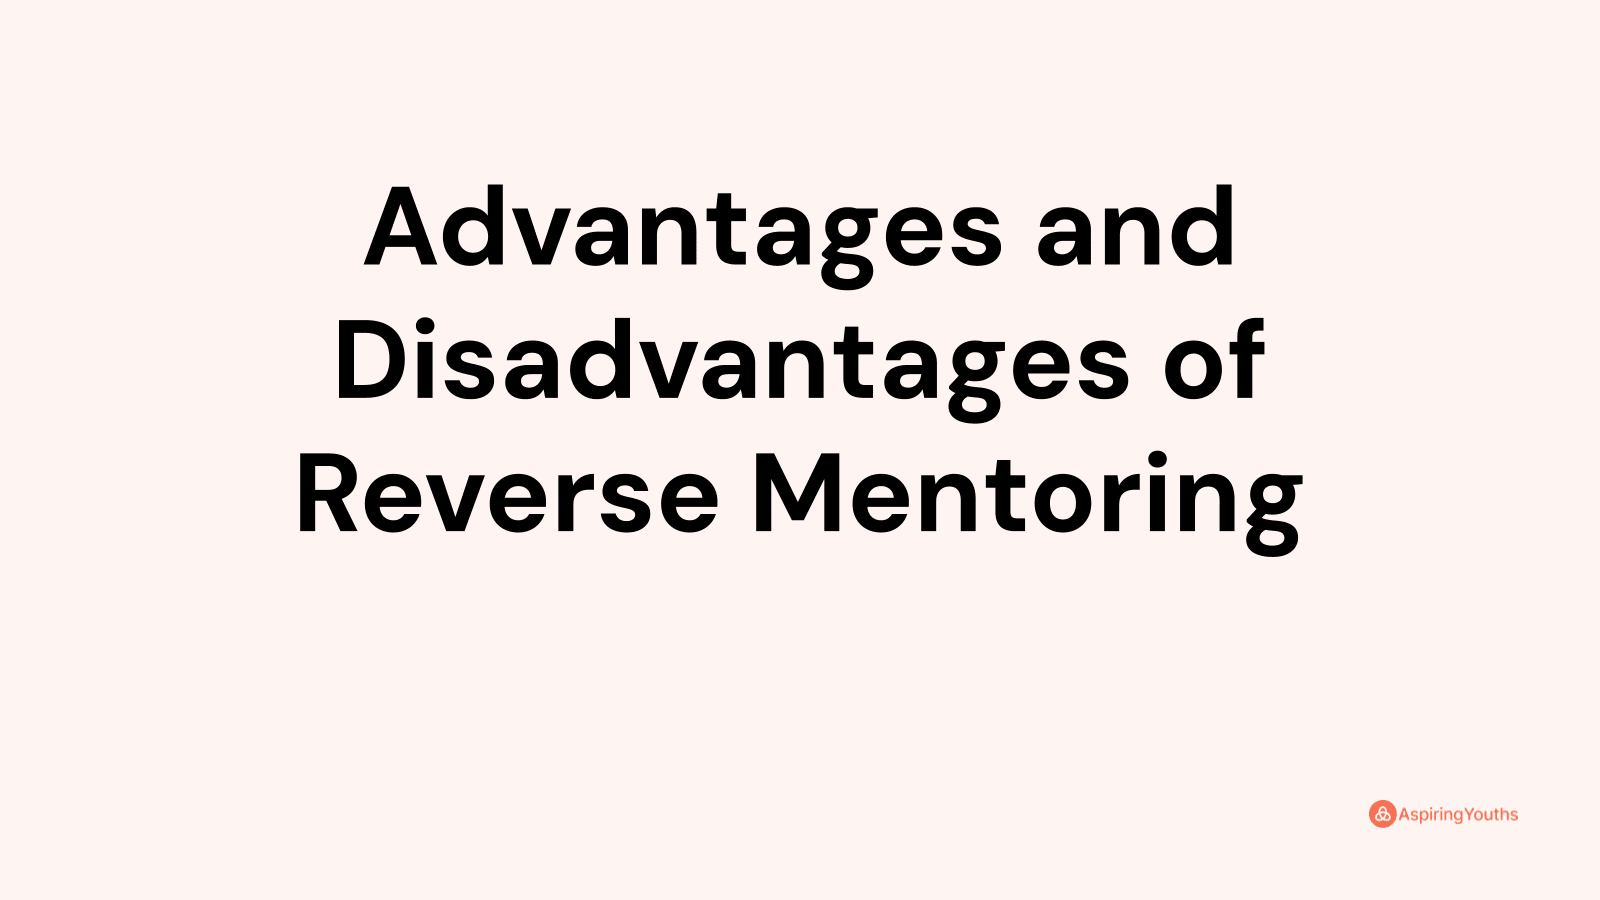 Advantages and disadvantages of Reverse Mentoring